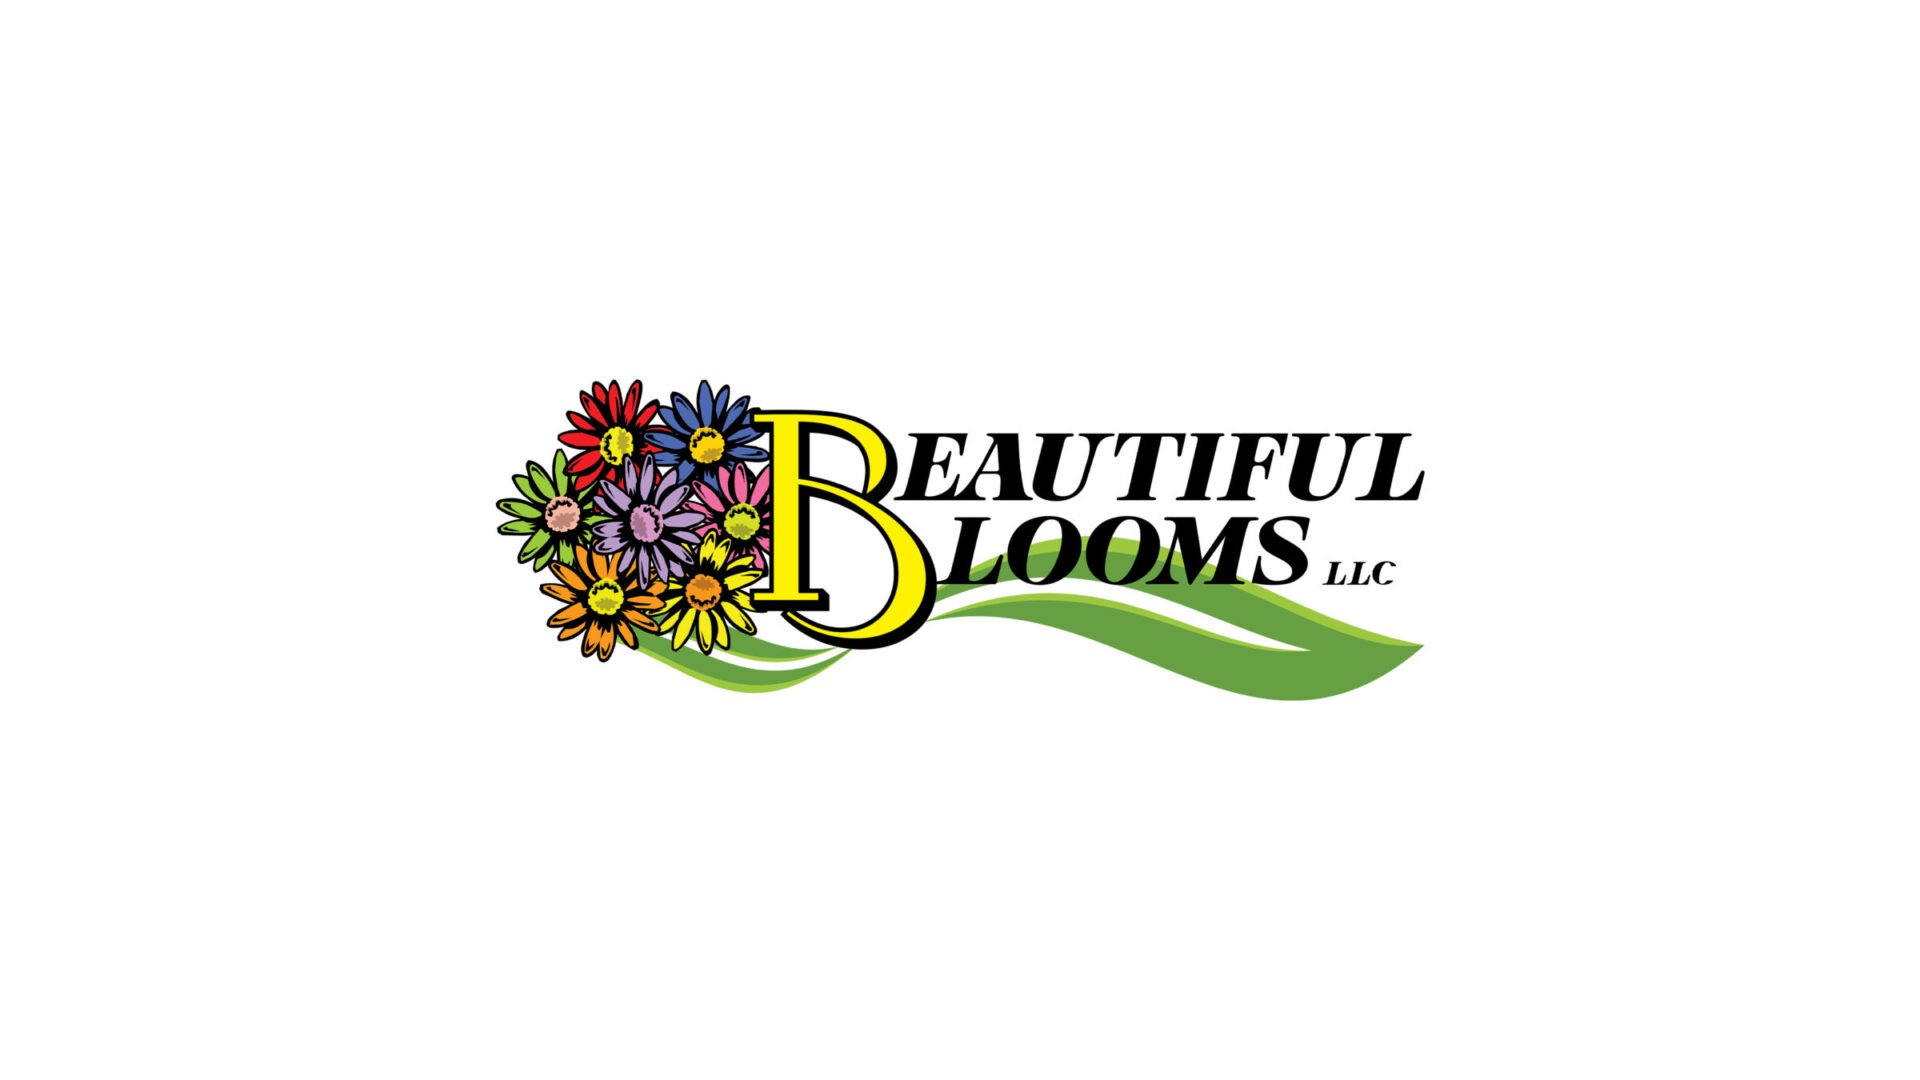 The image shows "Beautiful Blooms LLC" with a stylized letter B adorned with colorful, various flowers and green leaves against a white background.